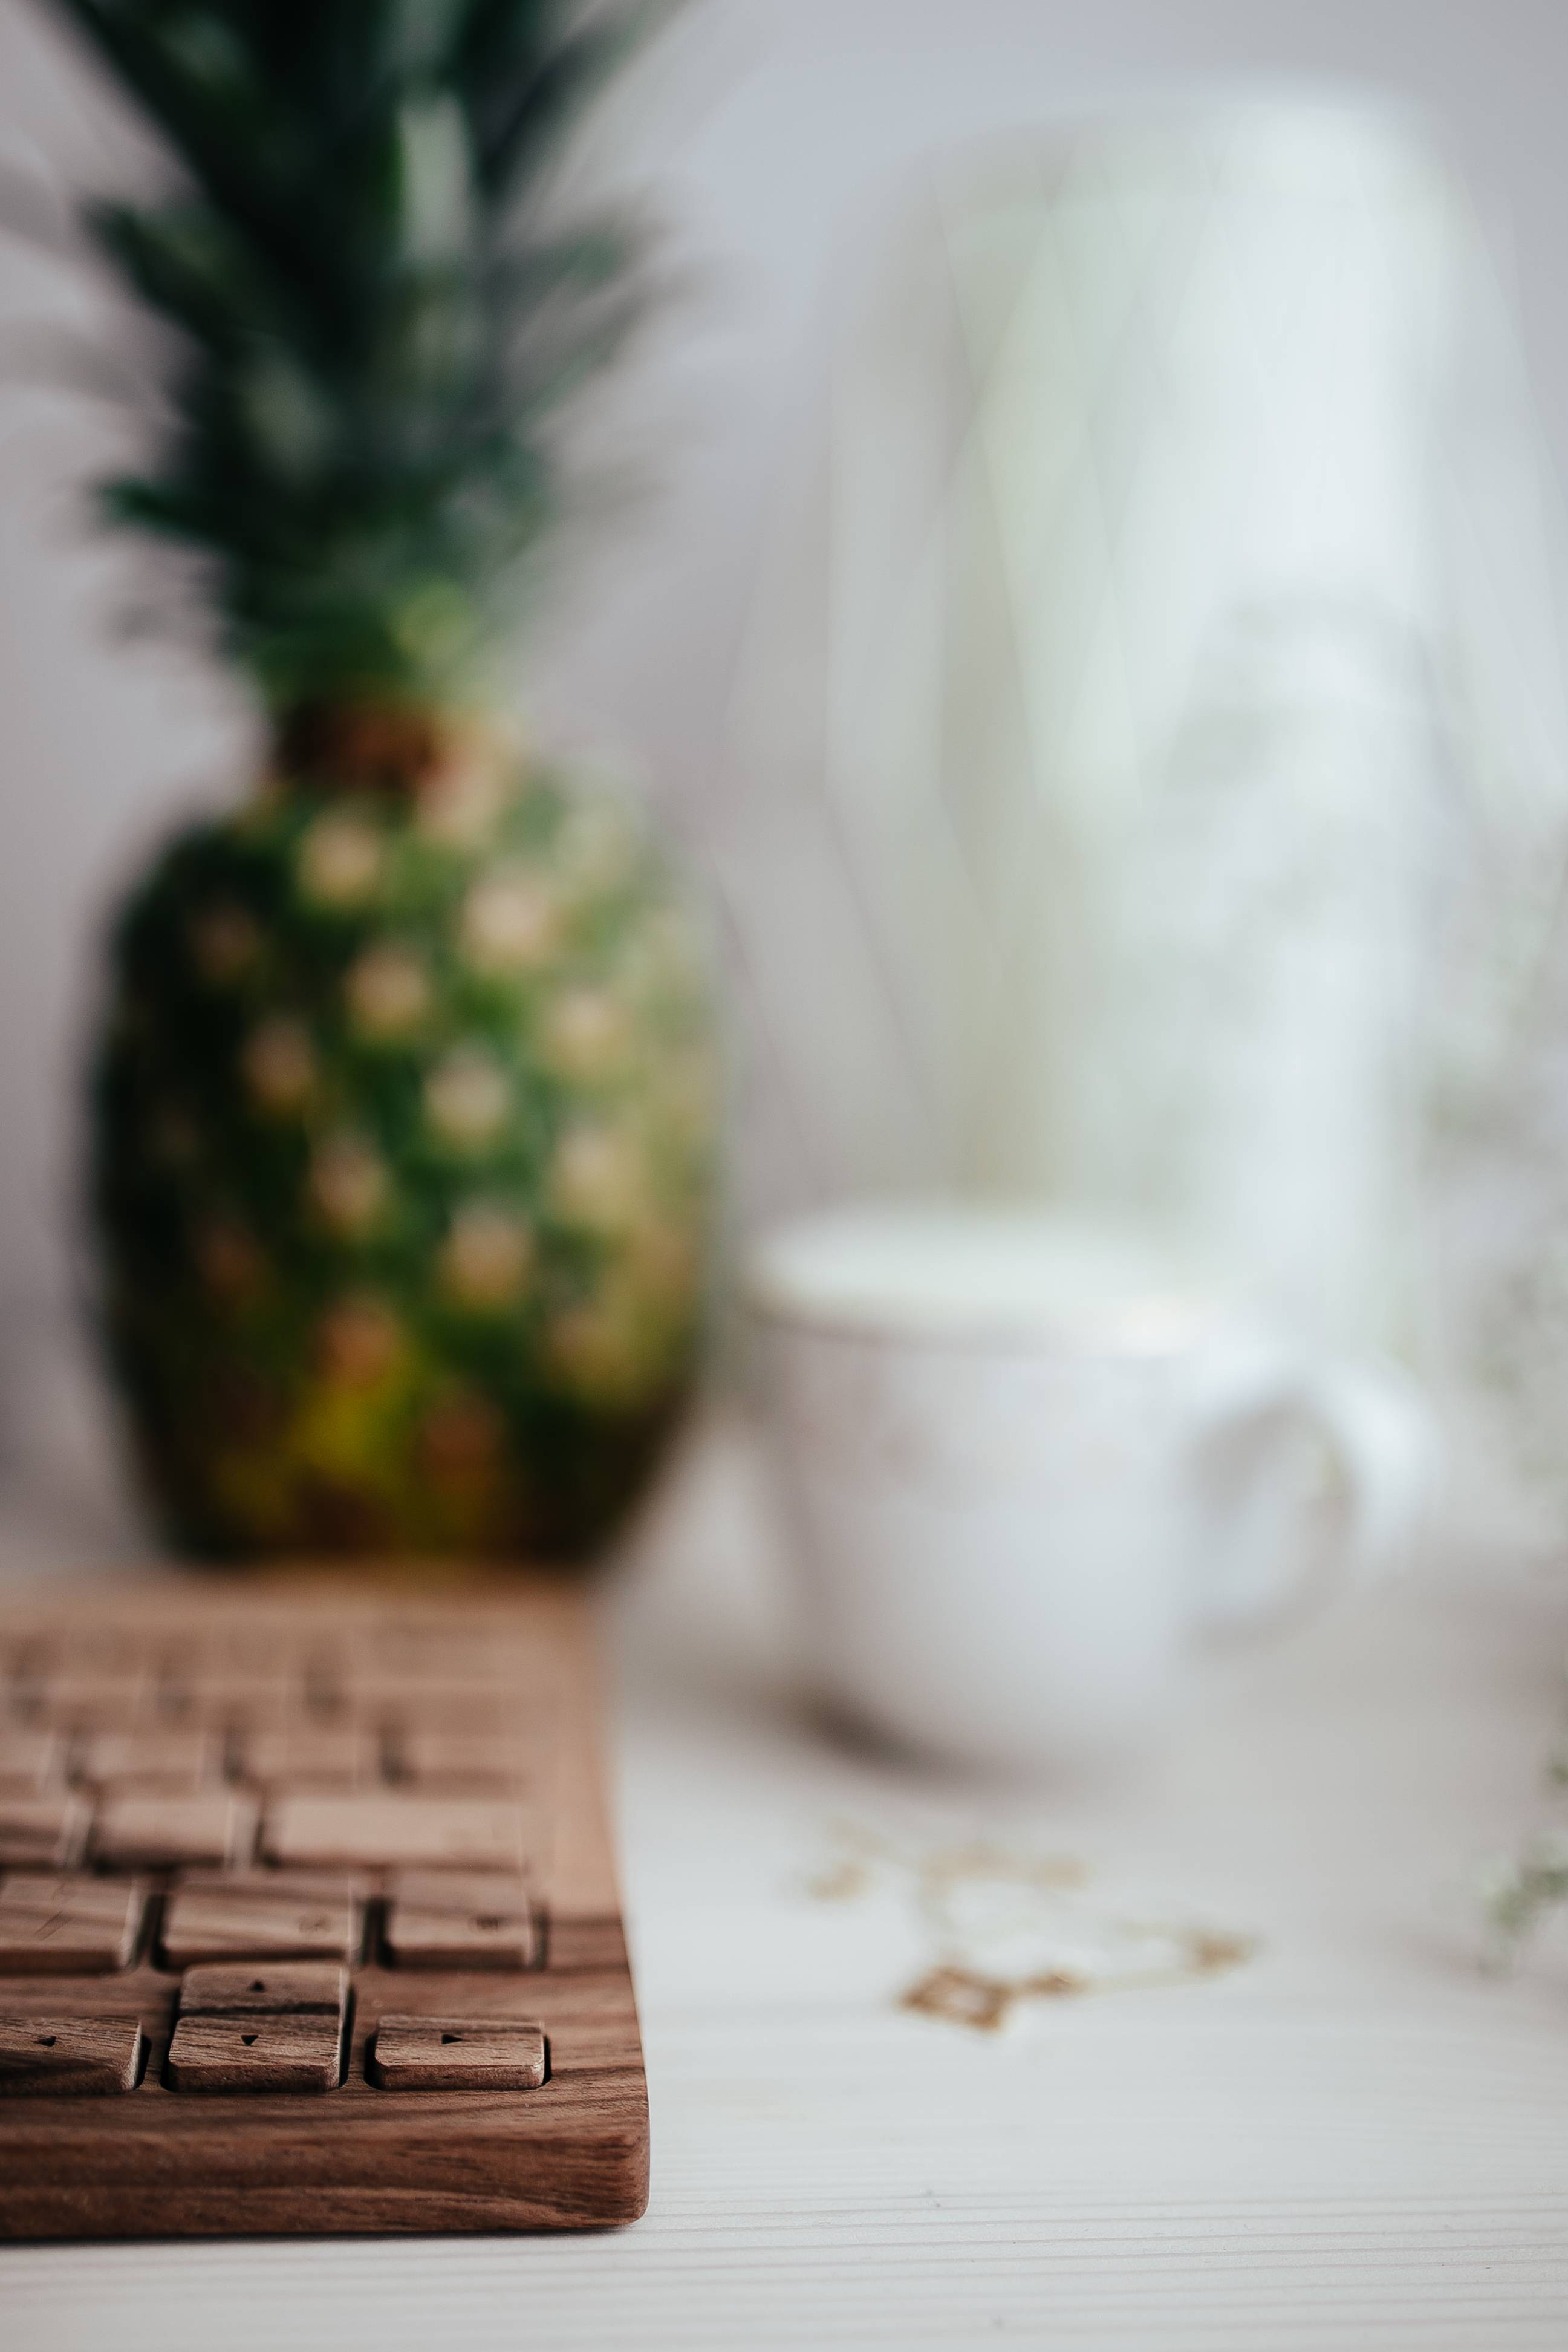 Wooden keyboard, coffee and pineapple